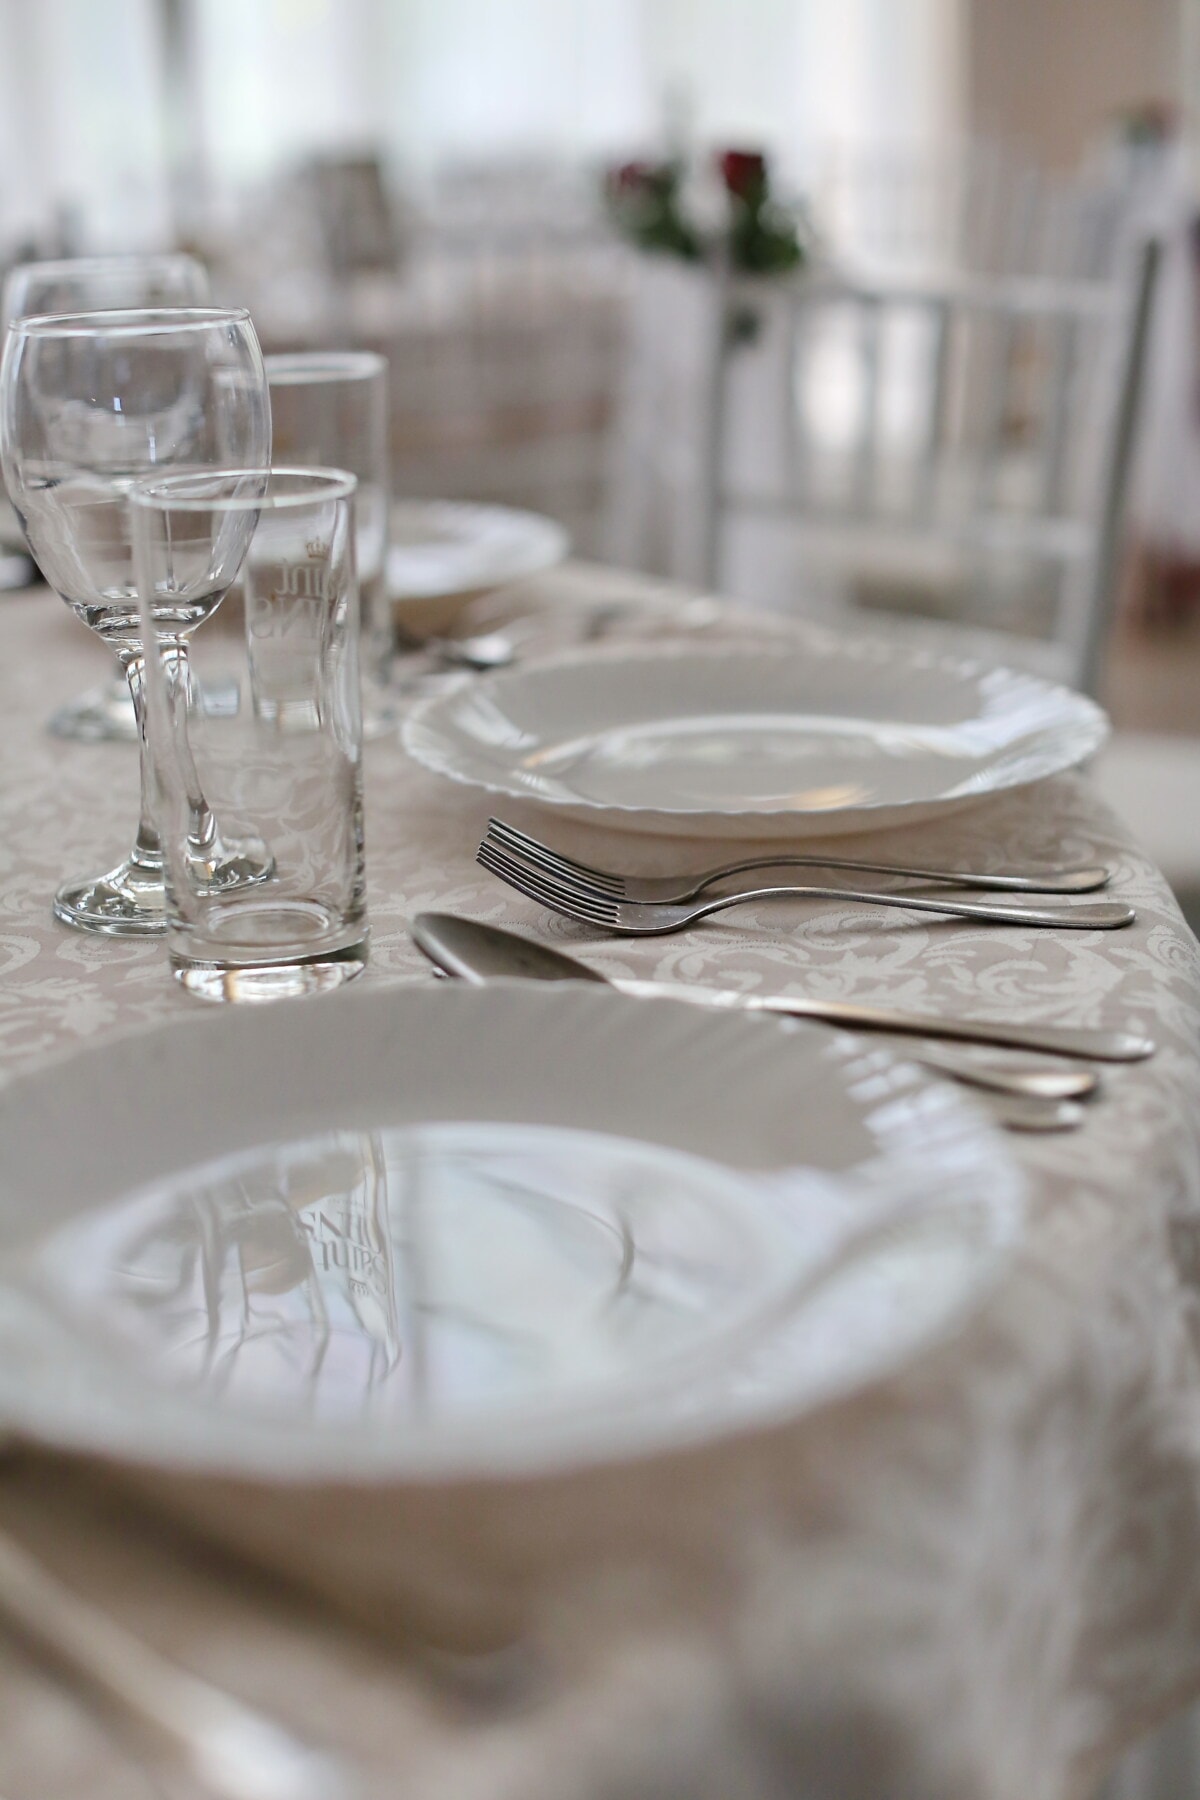 silverware, cutlery, spoon, fork, knife, table, tablecloth, dining area, lunchroom, glass